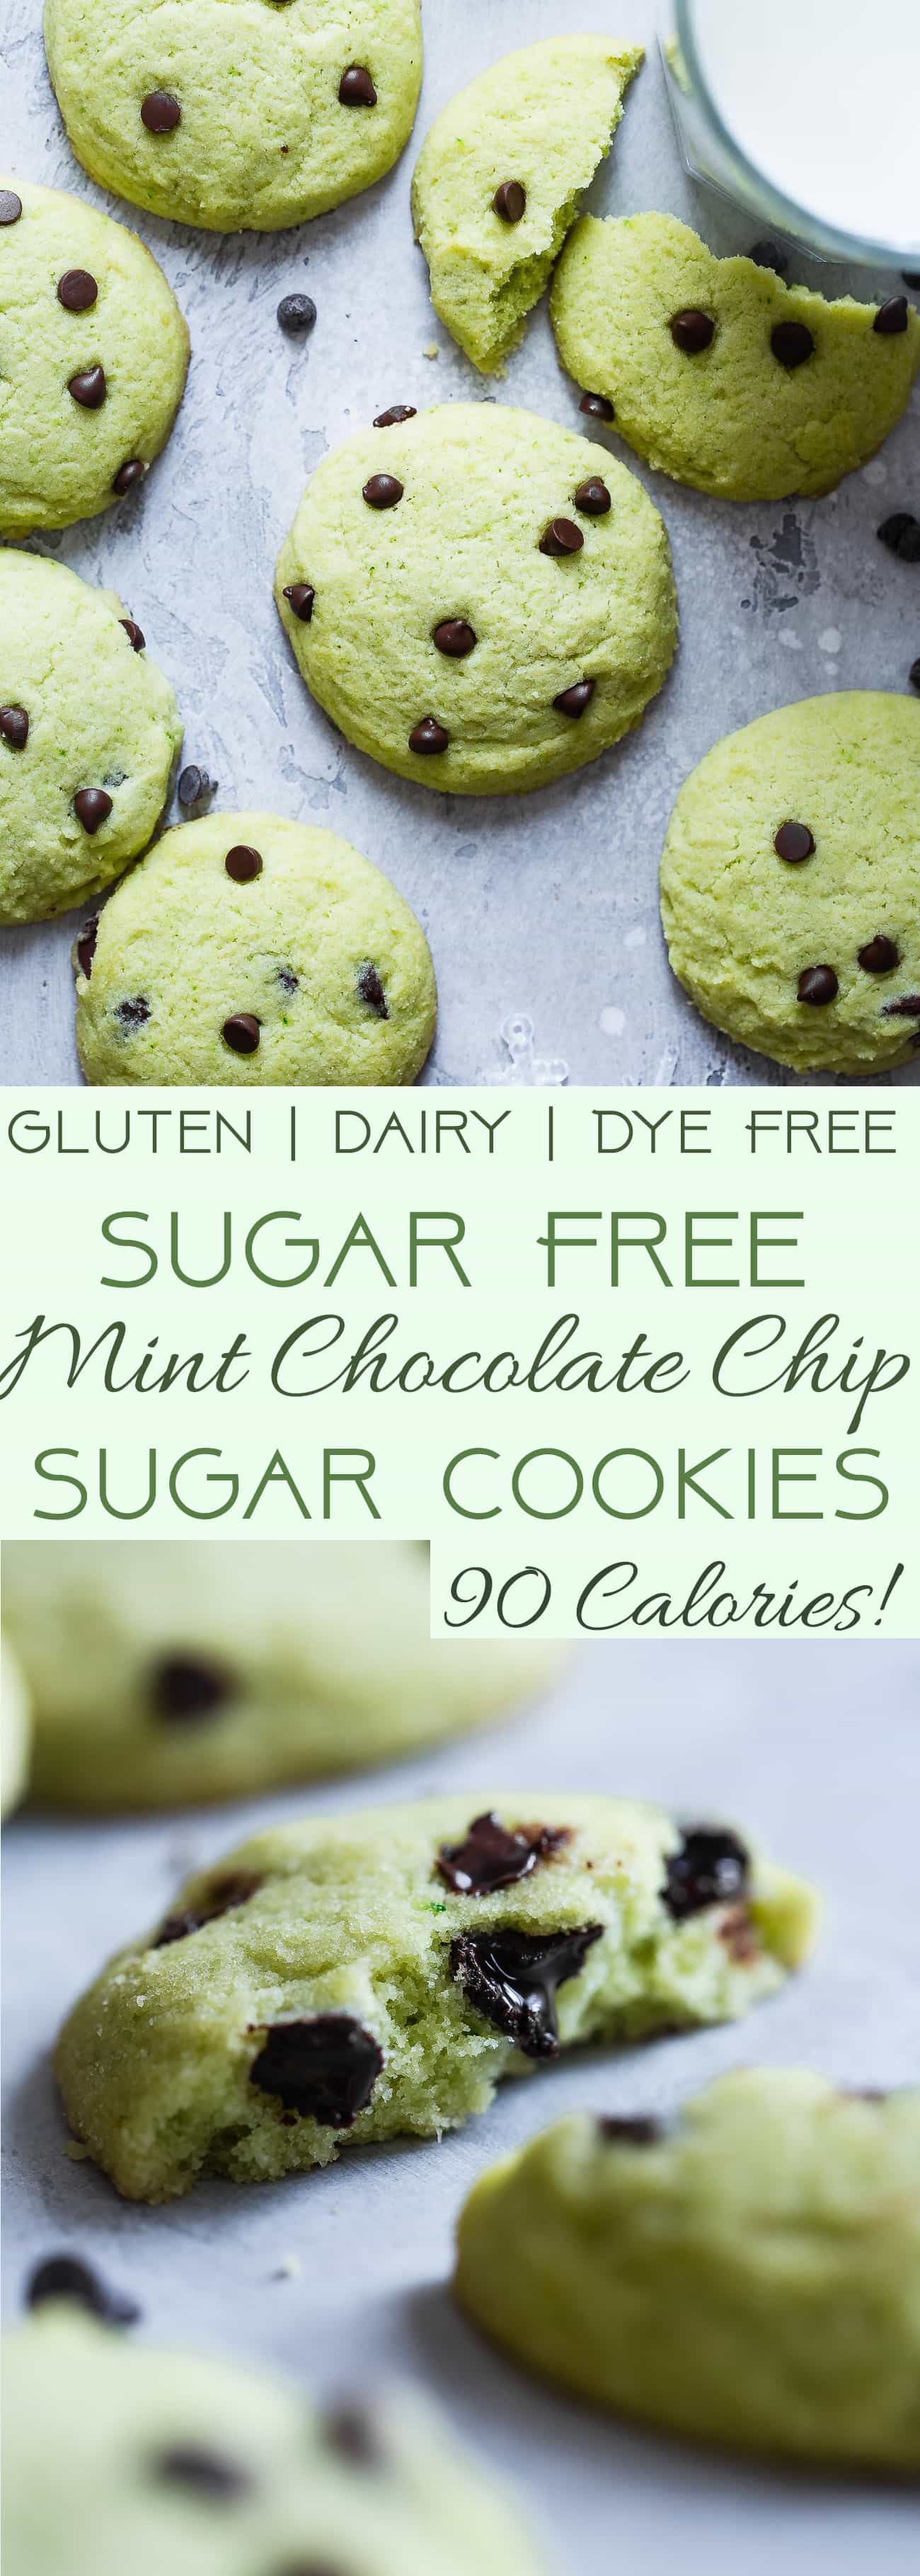 Gluten Free Mint Chocolate Chip Sugar Cookies - These healthy sugar cookies are SO soft and chewy that you will never believe they're sugar free, naturally colored and only 90 calories and 4 SmartPoints! Perfect for Christmas! | Foodfaithfitness.com | @FoodFaithFit | soft gluten free sugar cookies. simple gluten fee sugar cookies. healthy gluten free sugar cookies. gluten free christmas cookies. healthy christmas cookies. low carb sugar cookies. sugar free cookies.